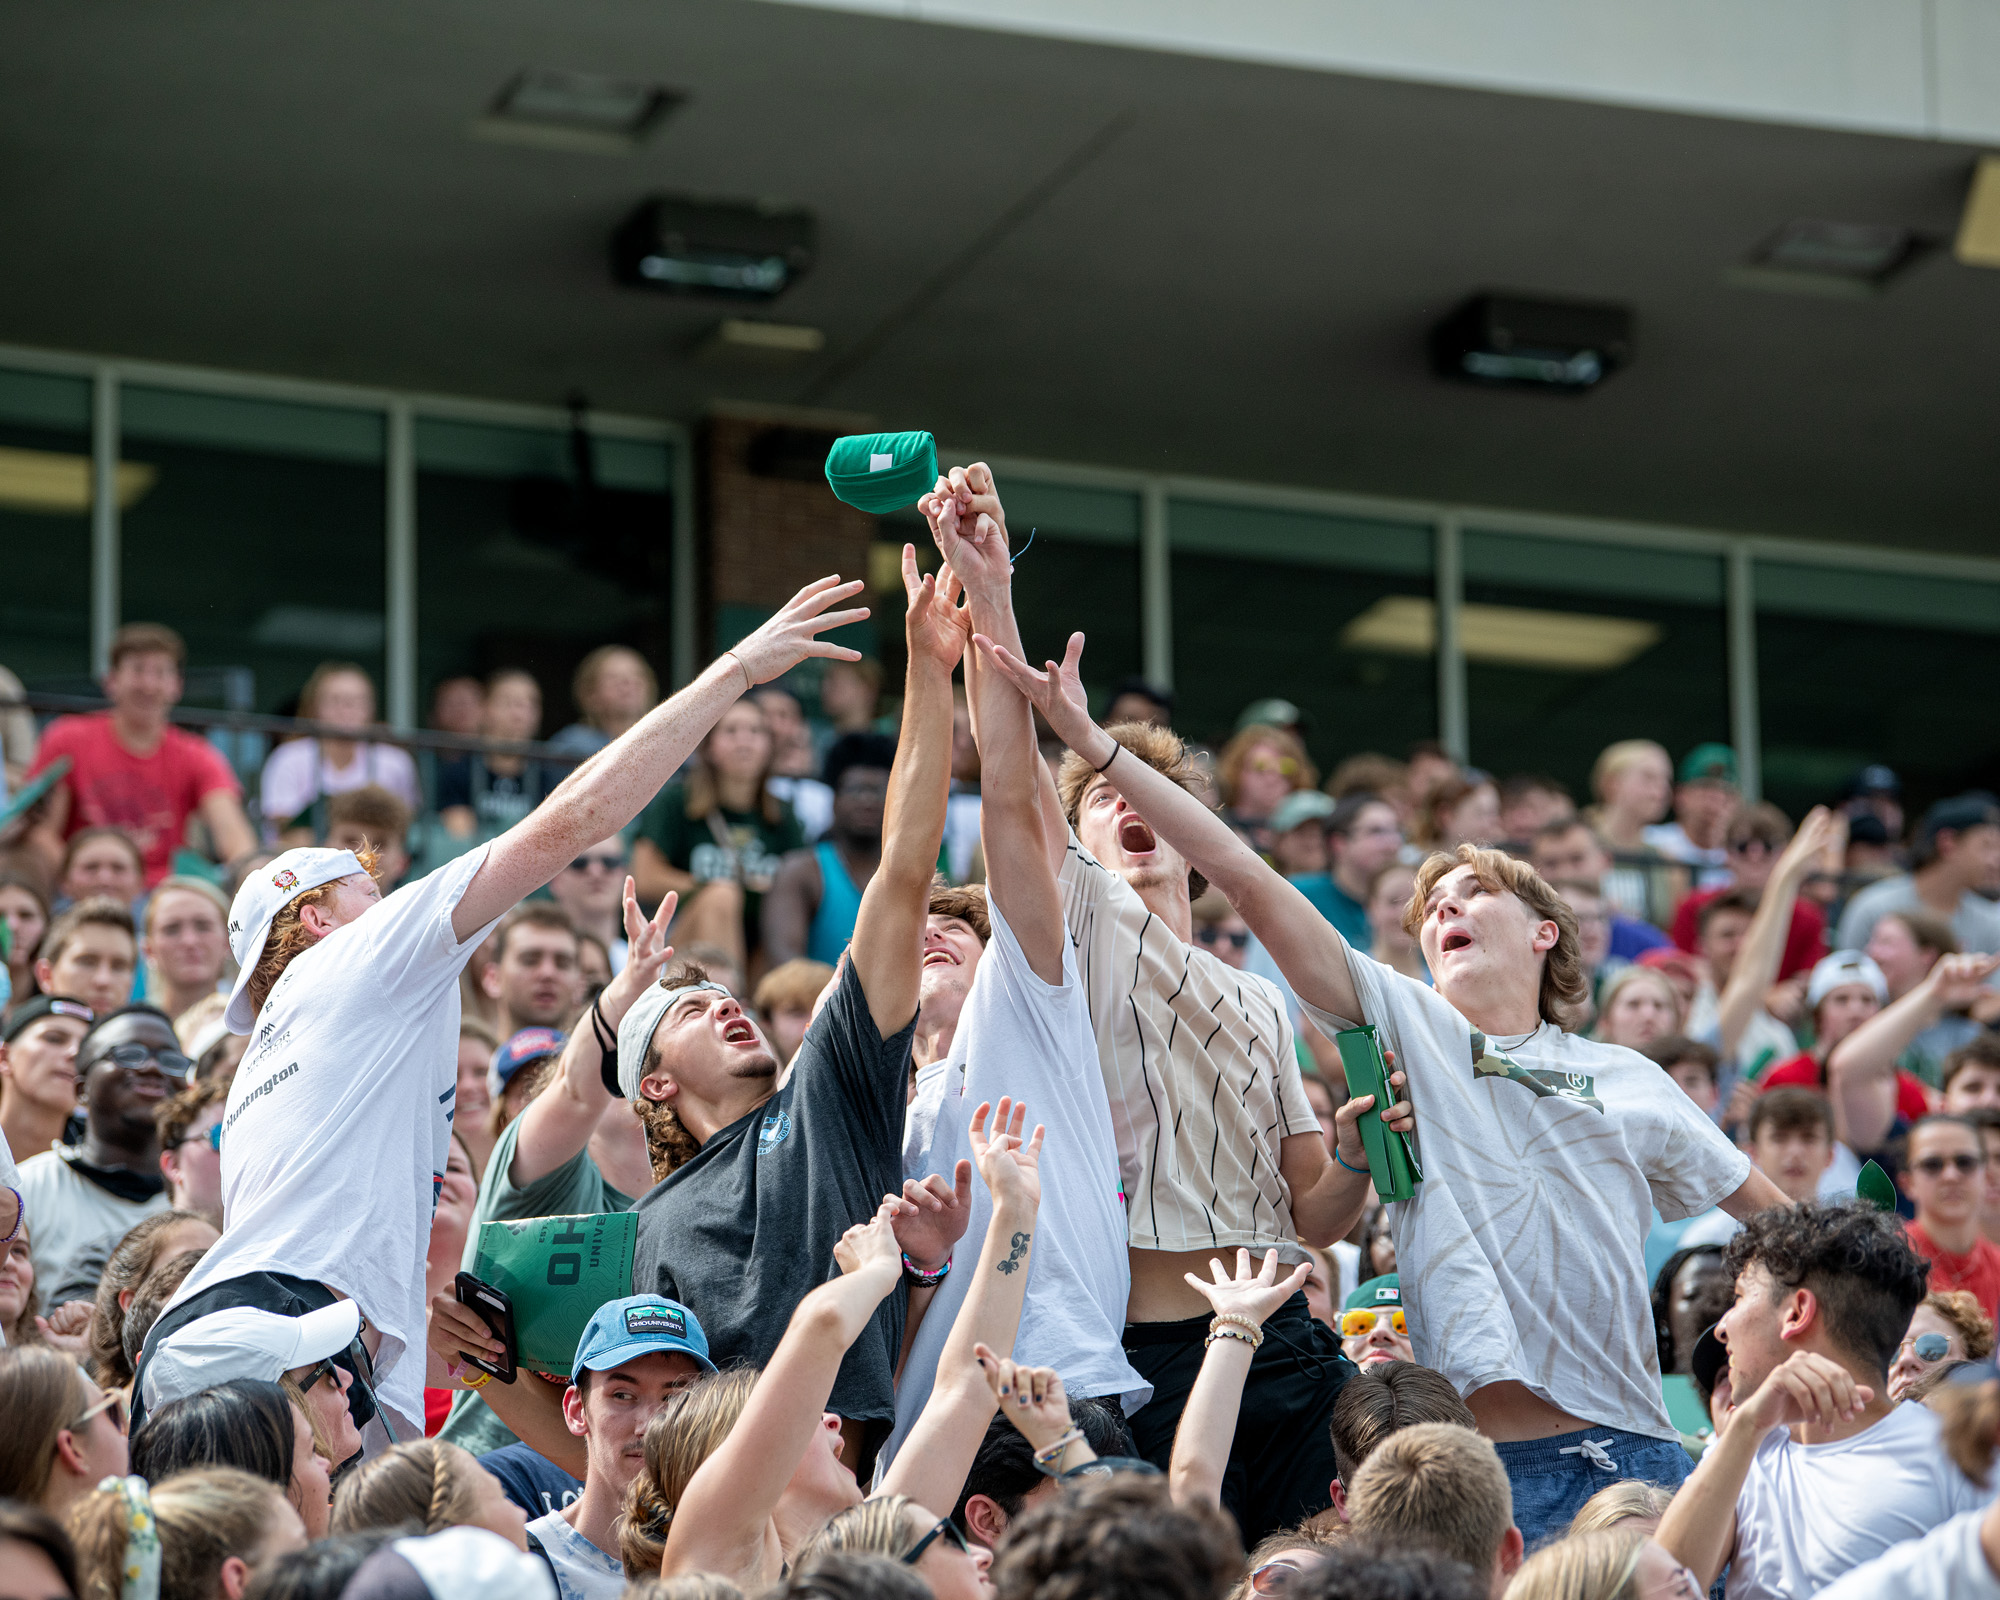 Students in the crowd of the 2021 First Year Convocation jump to grab OHIO items thrown into the crowd